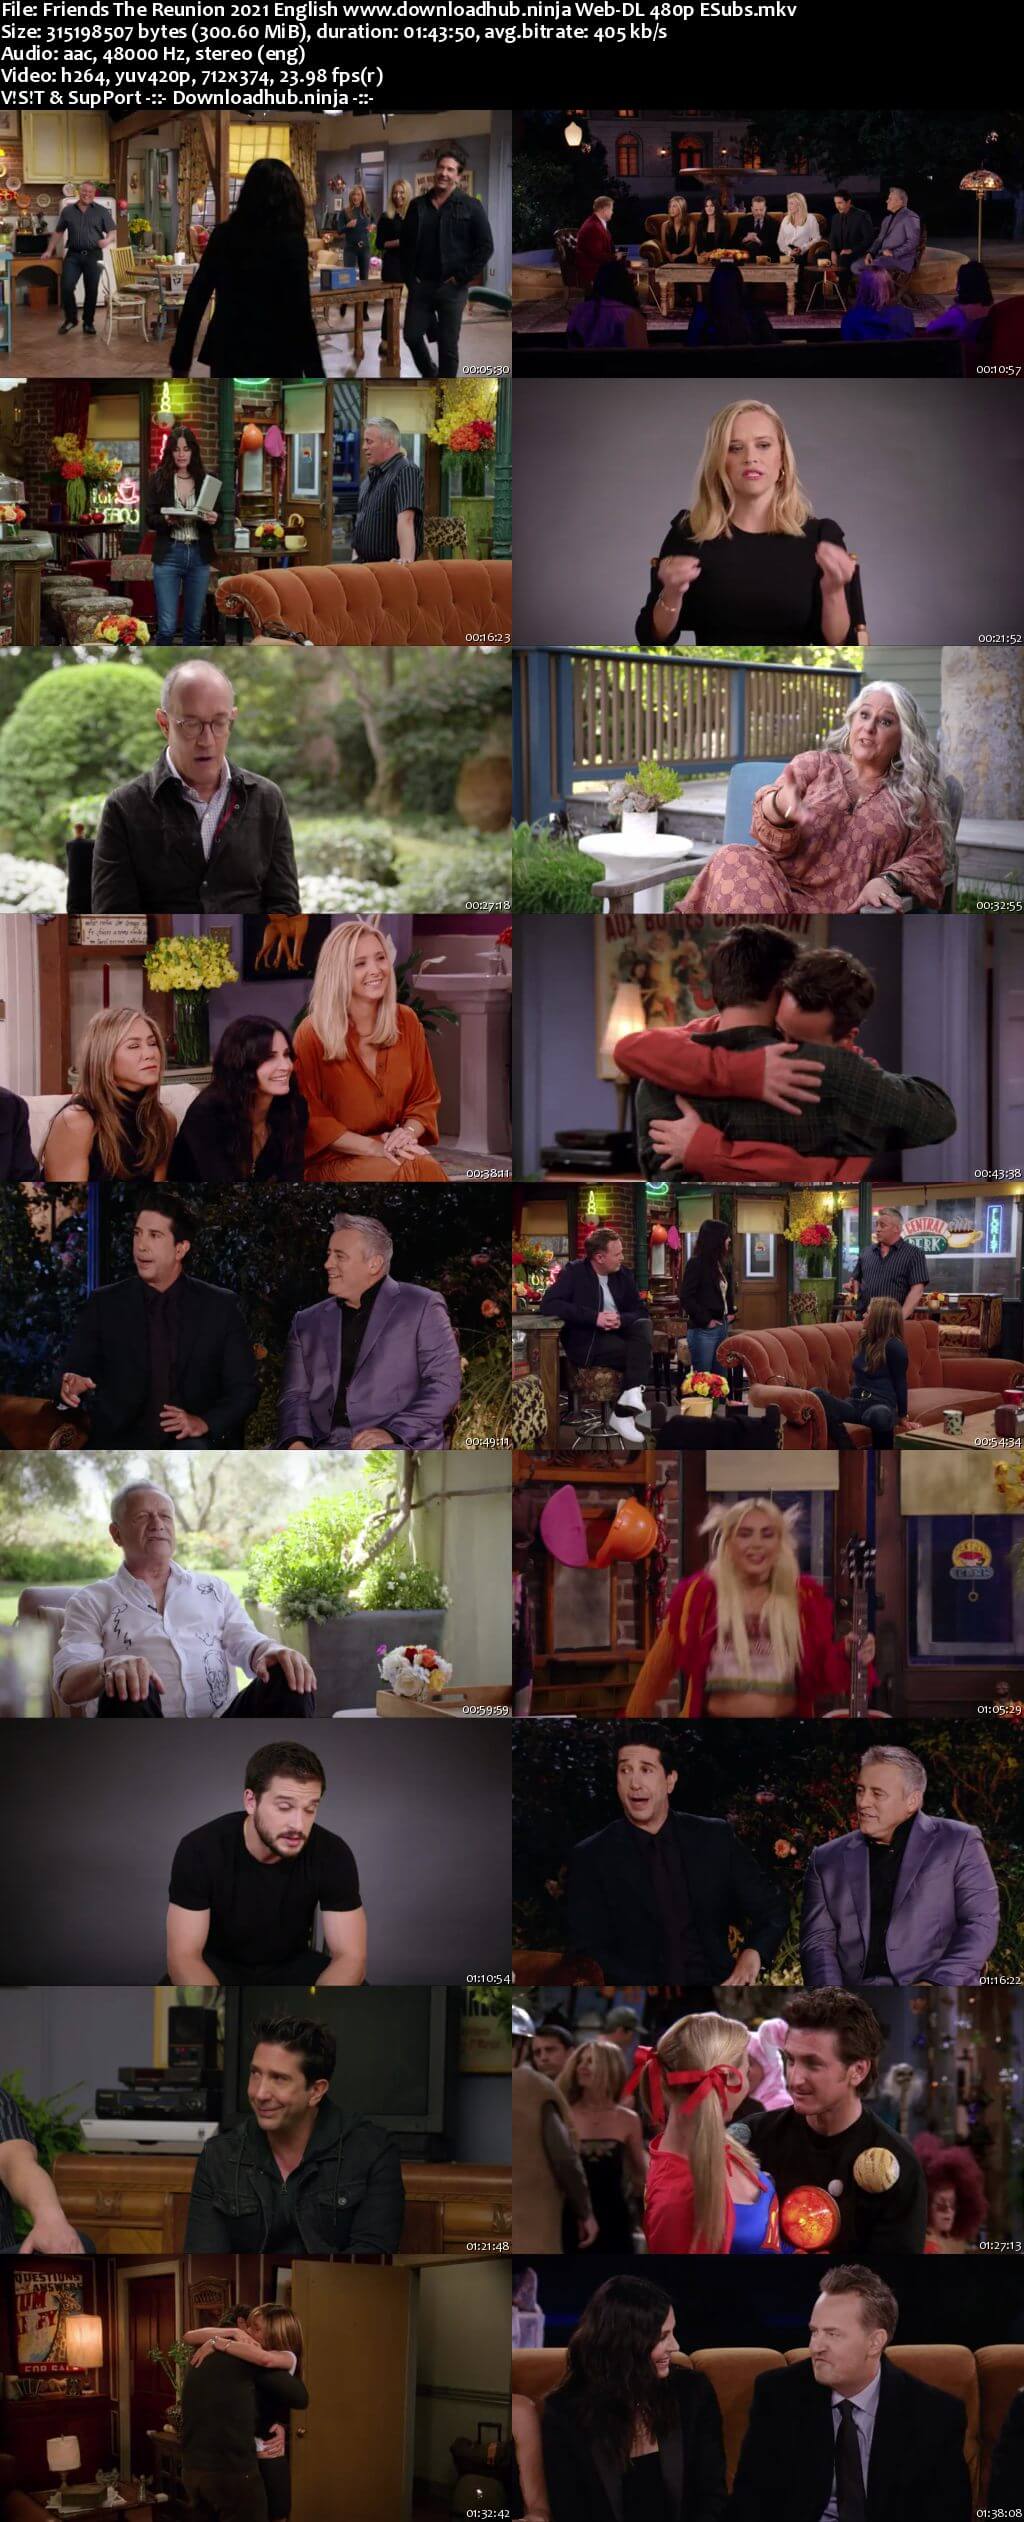 Friends The Reunion 2021 English 300MB Web-DL 480p ESubs